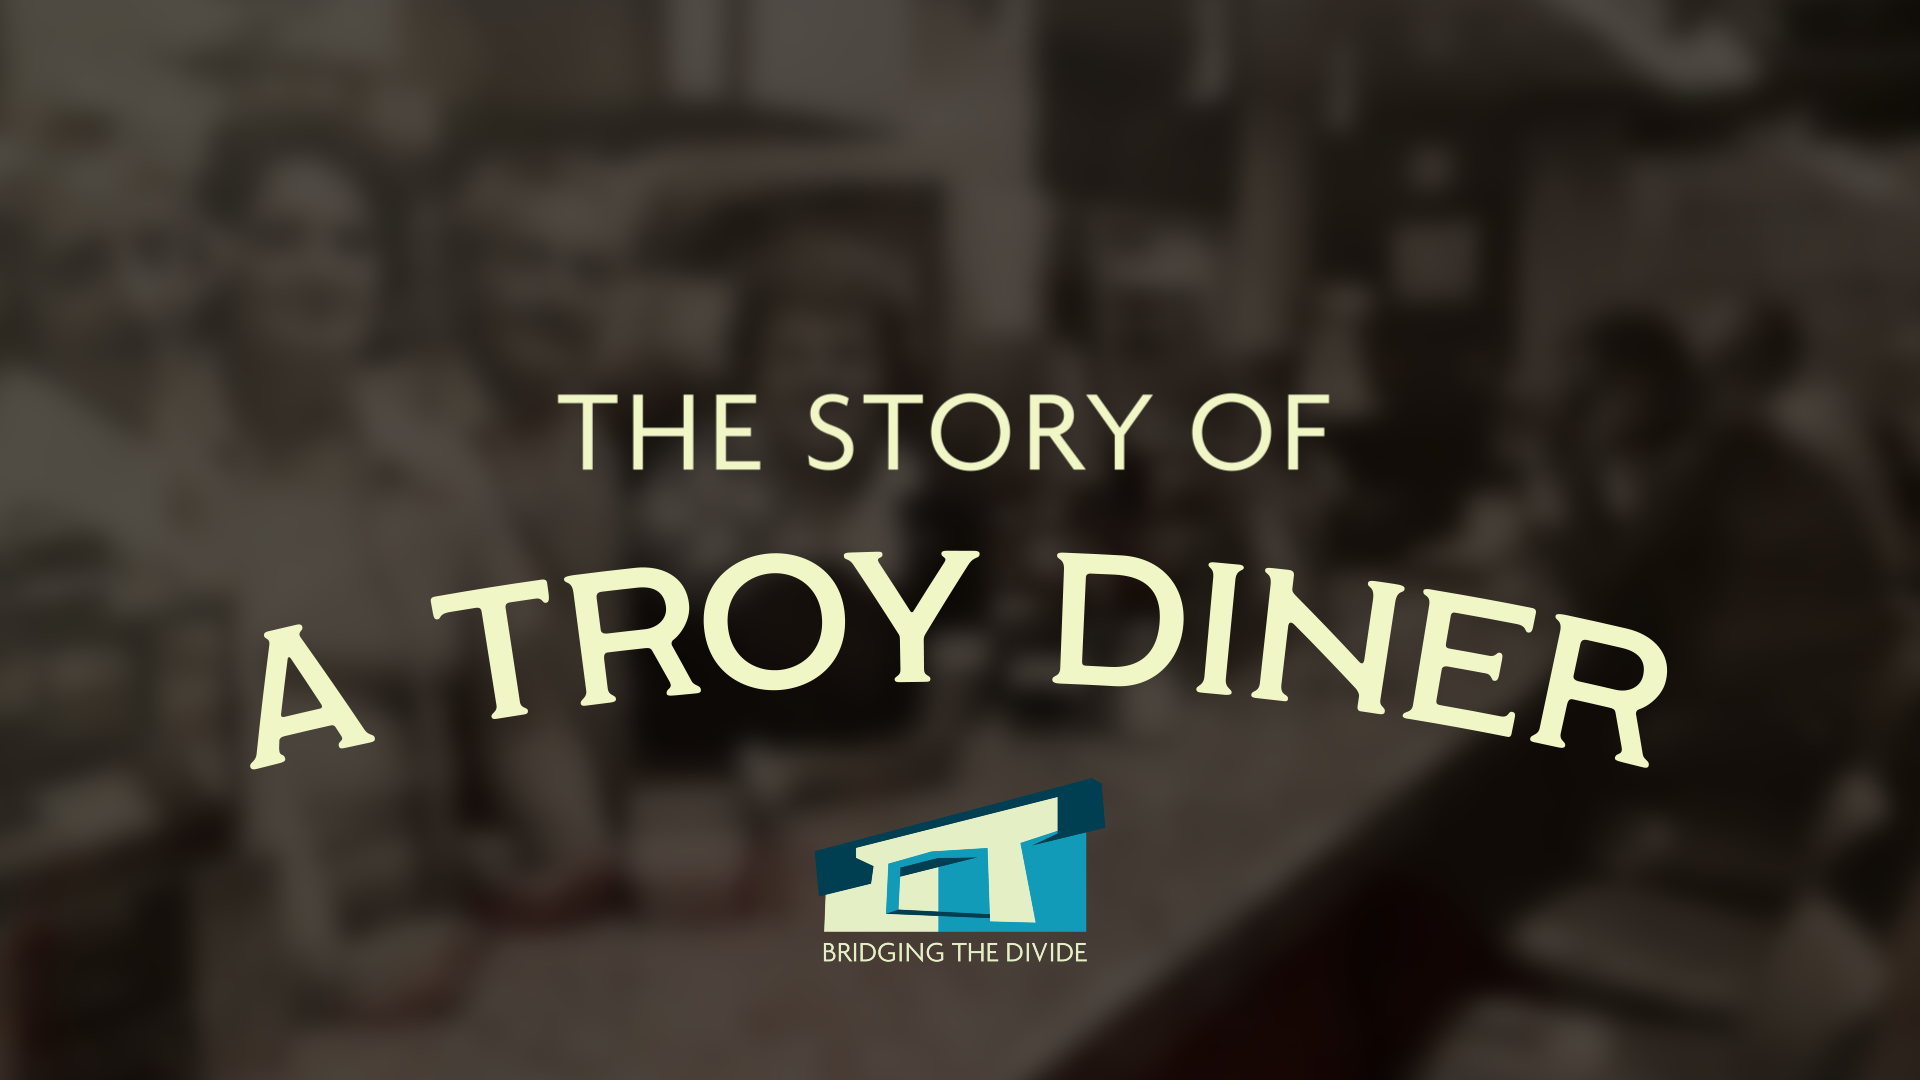 The Story of a Troy Diner